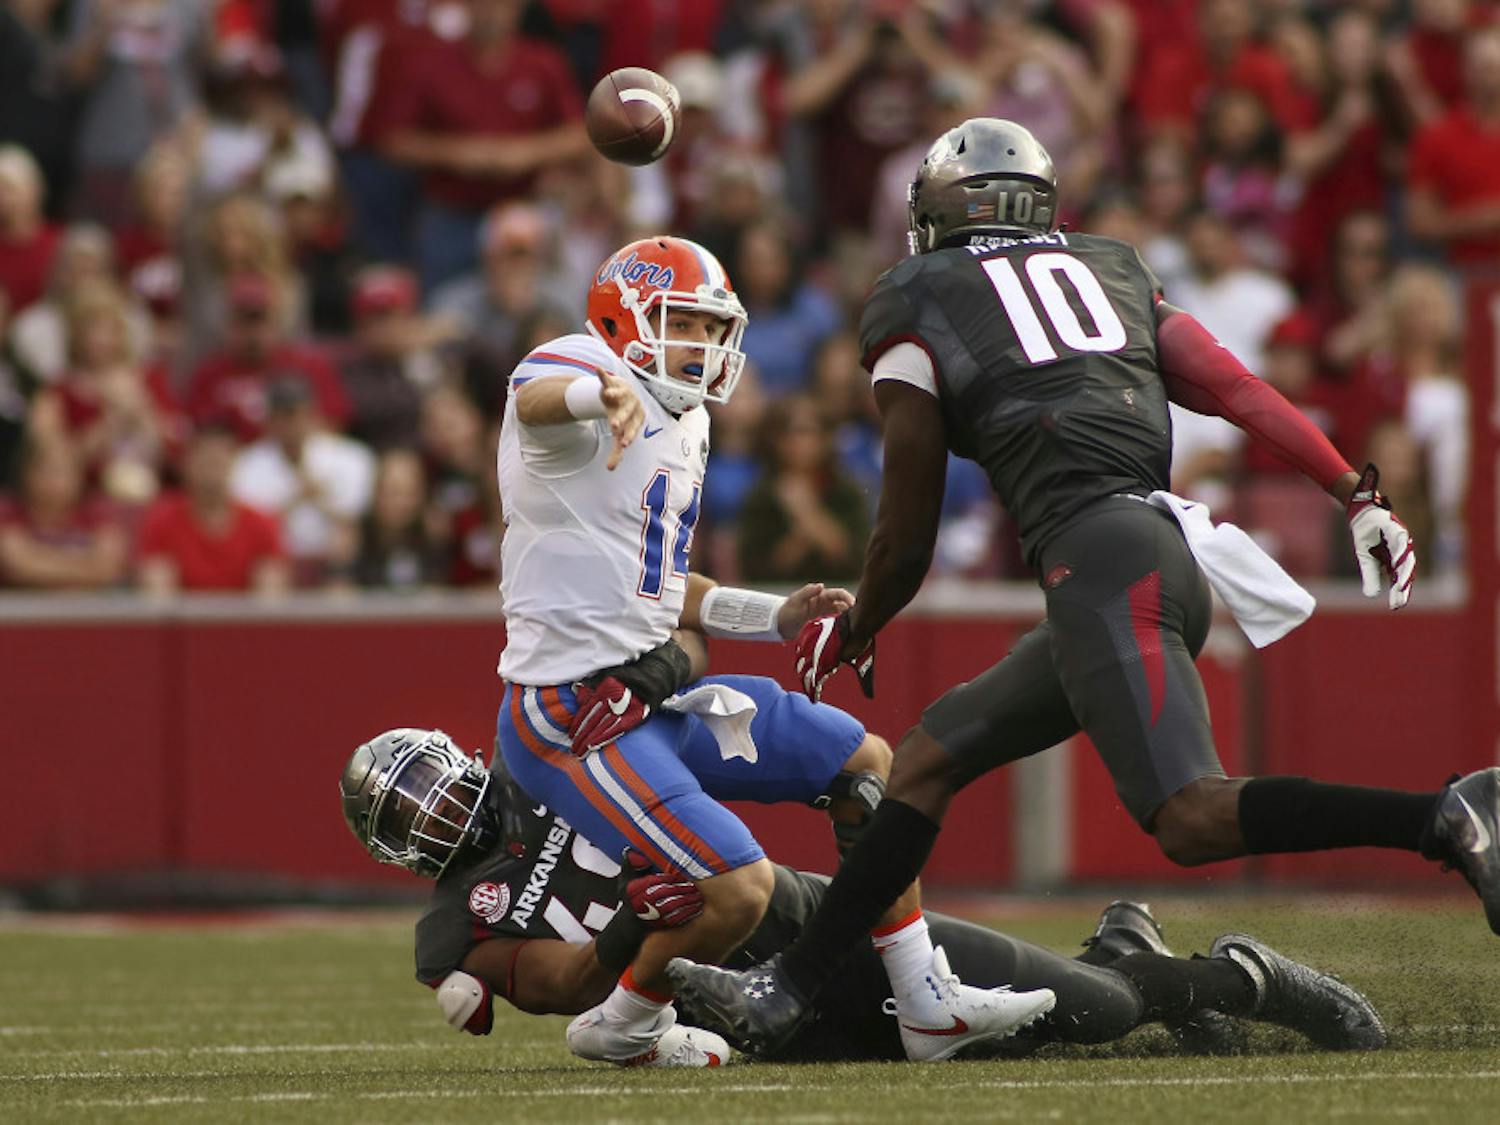 Florida's Luke Del Rio (14) looses the ball before being taken down by Arkansas' Deatrich Wise Jr. (48) and Randy Ramsey (10) during the second half of an NCAA college football game on Nov. 5, 2016 in Fayetteville, Arkansas. Arkansas beat Florida 31-10. (AP Photo/Samantha Baker)